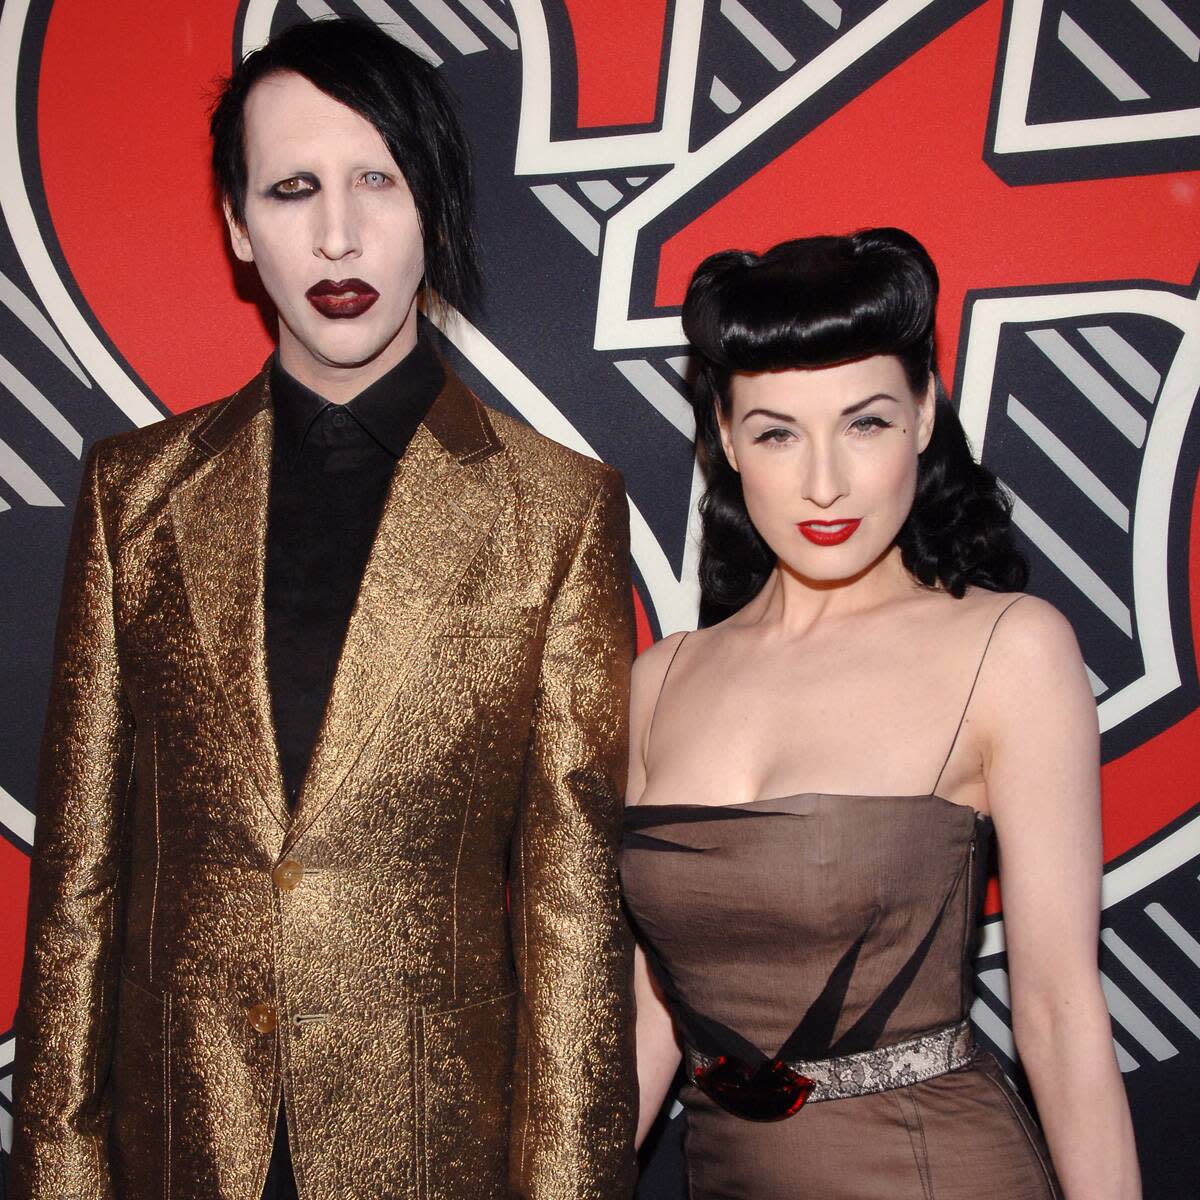 Dita Von Teese addresses allegations of abuse against ex-husband Marilyn Manson